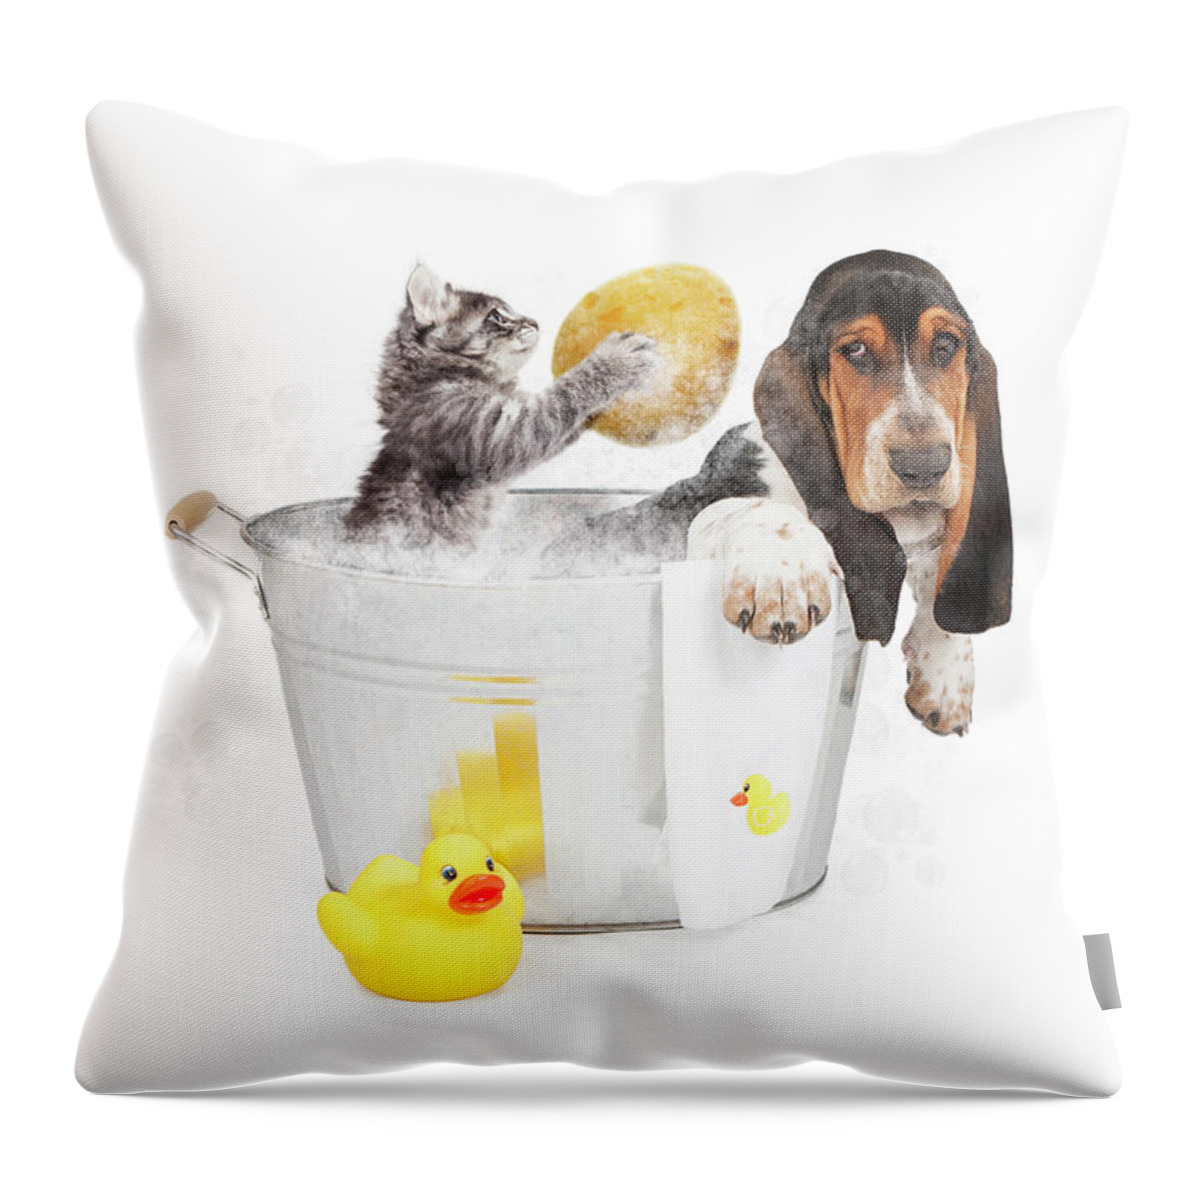 Dog Throw Pillow featuring the photograph Kitten Washing Basset Hound in Tub by Good Focused